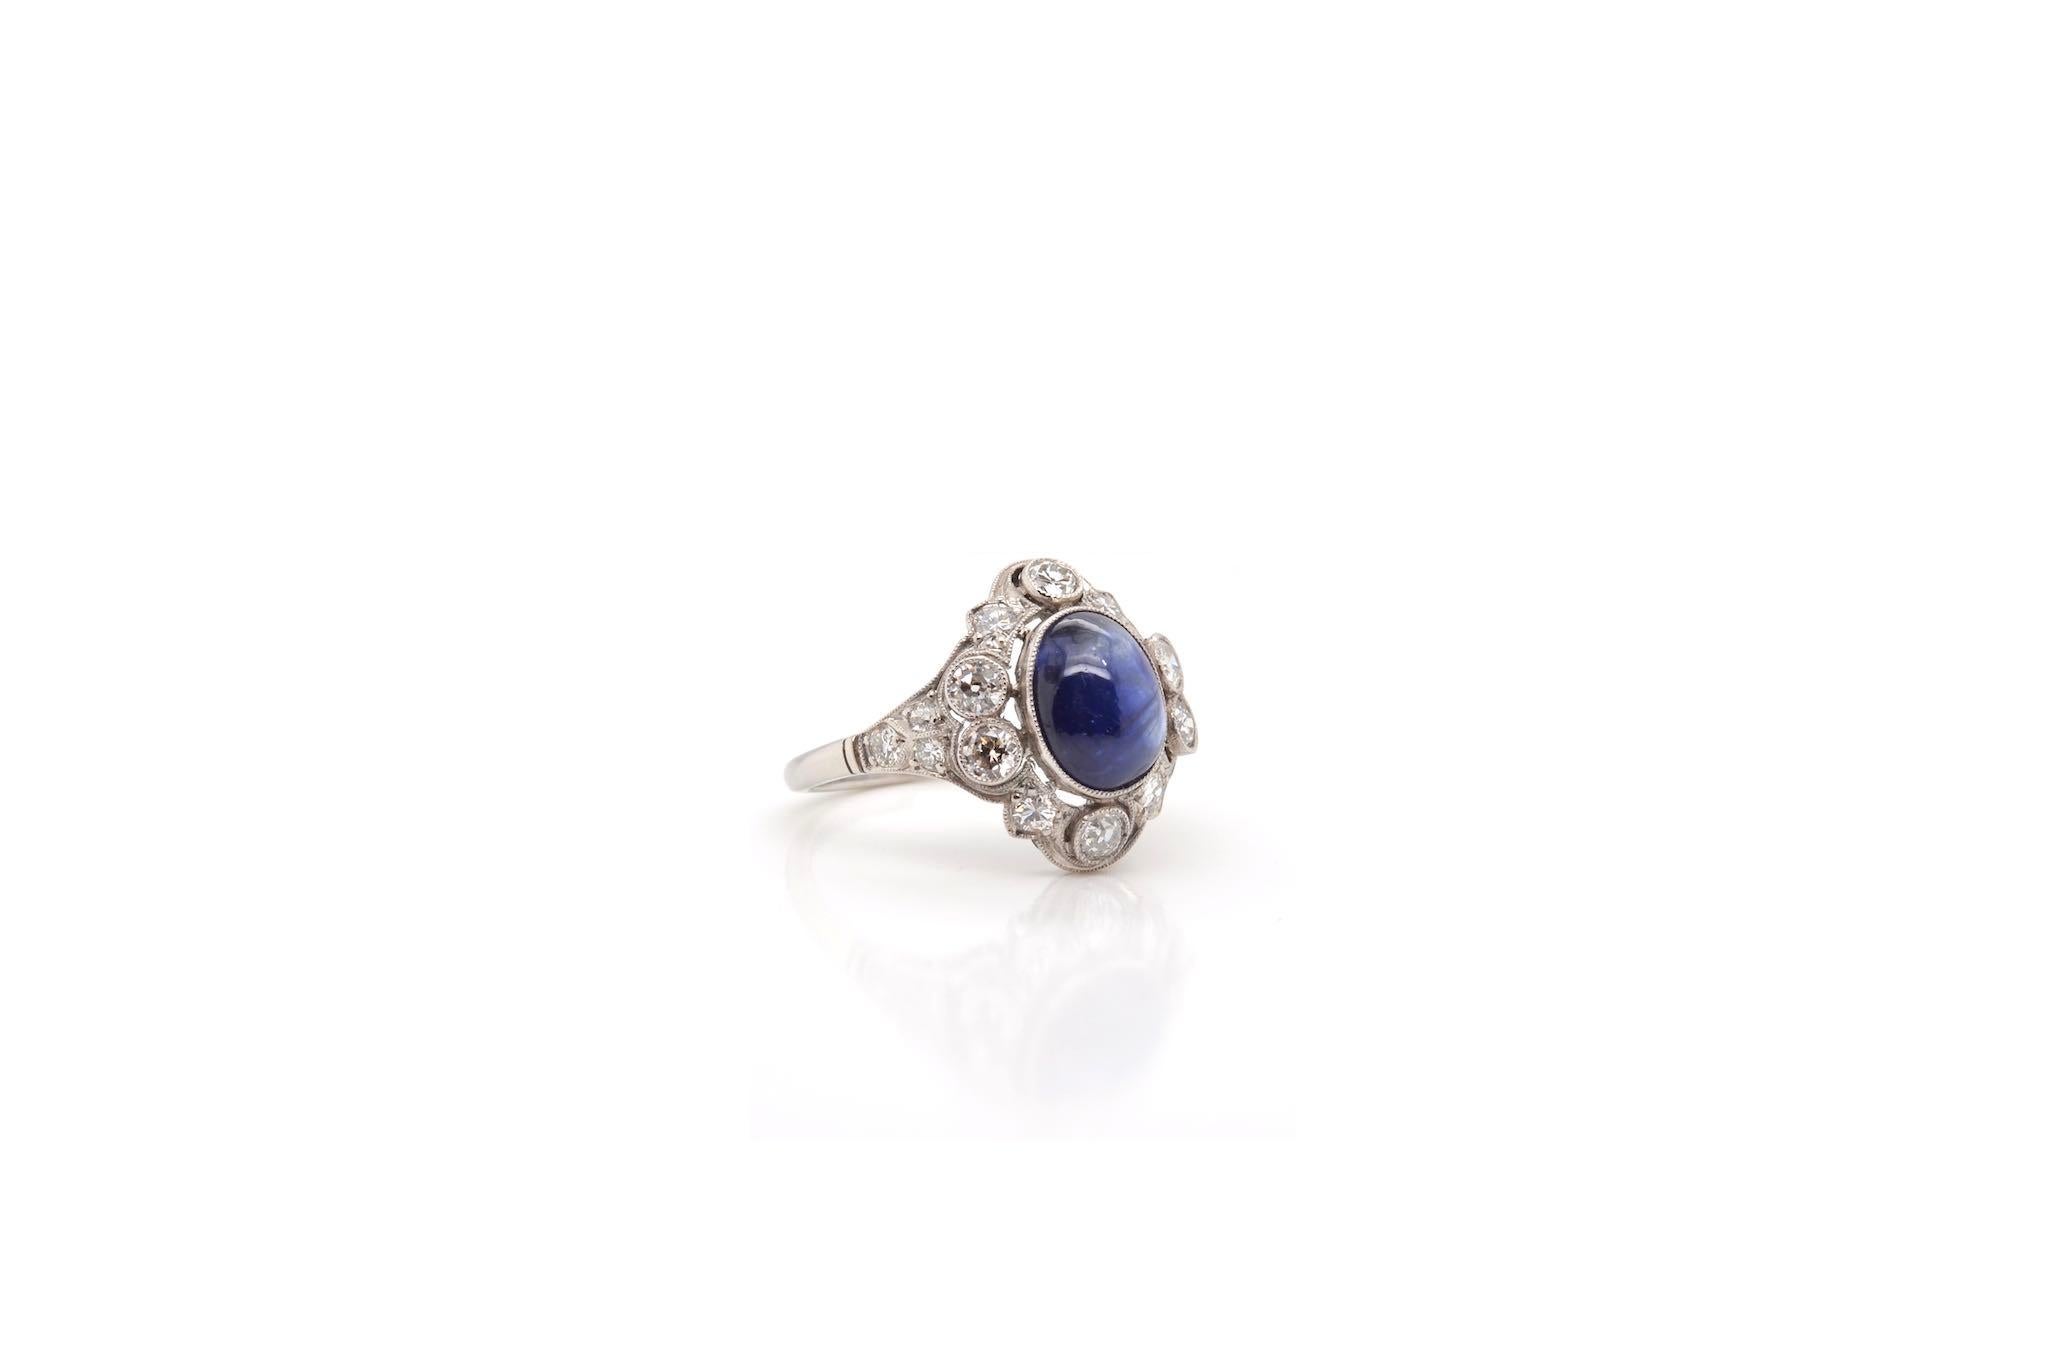 Cabochon 3 carats cabochon sapphire and old-cut diamonds ring For Sale